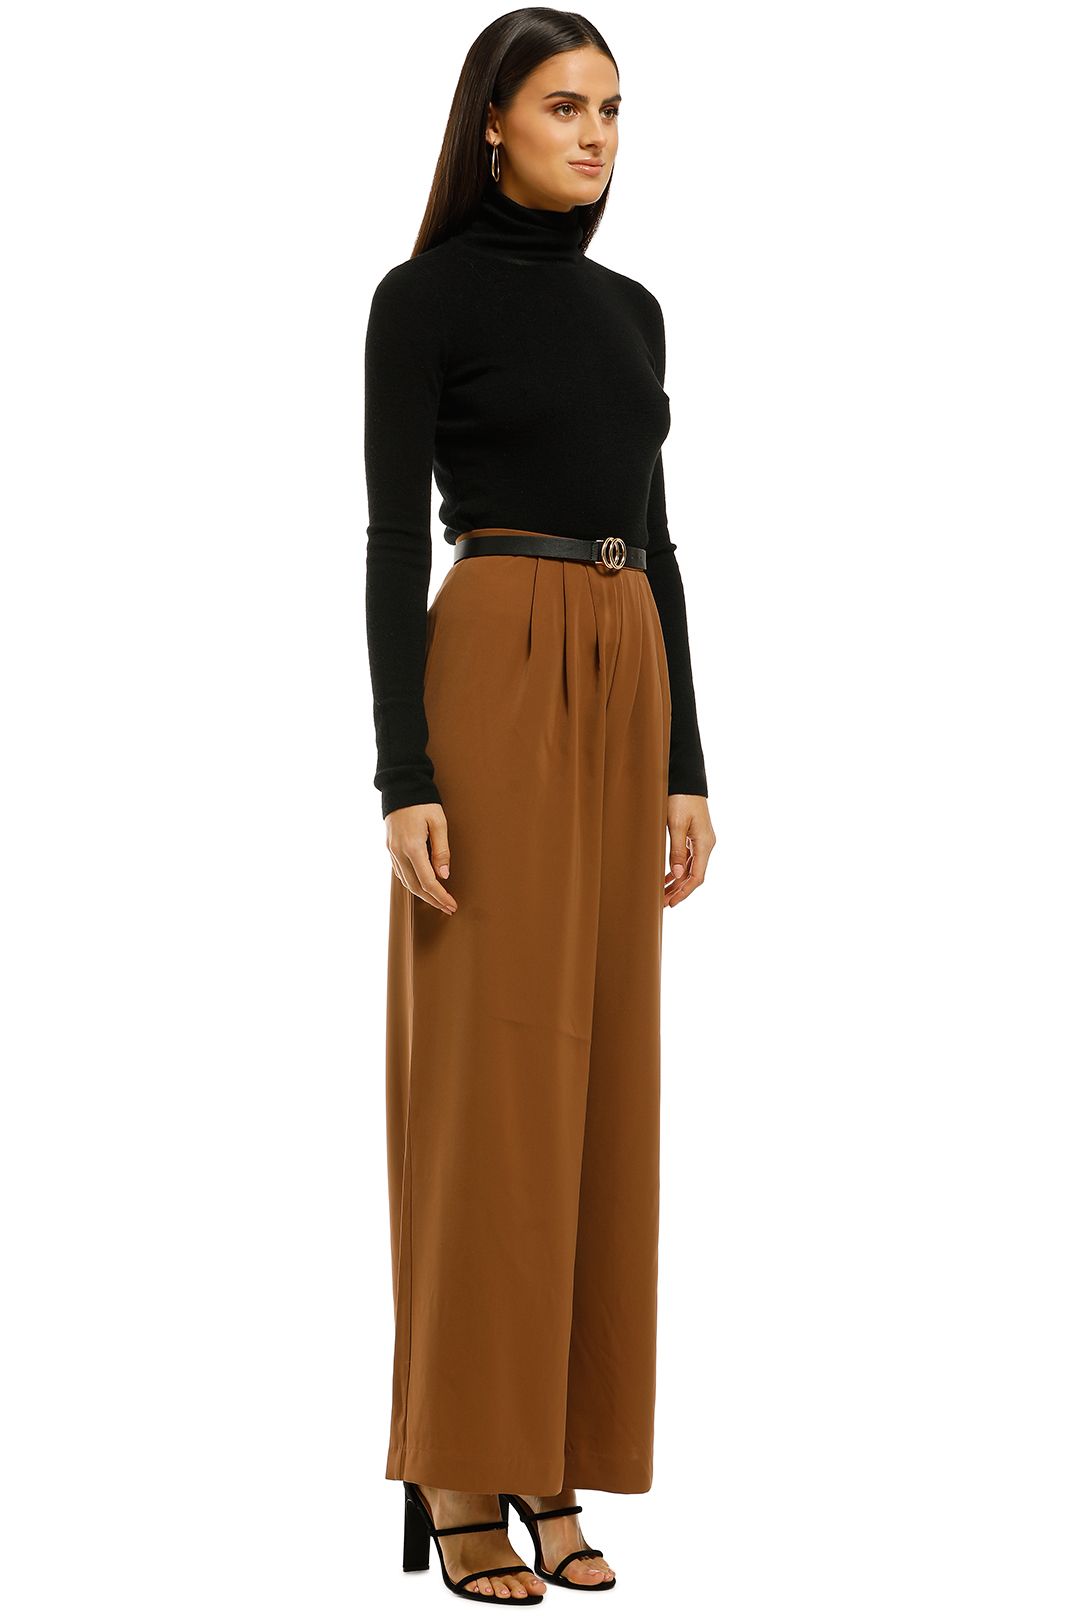 Friend of Audrey - Pleated Wide Pant - Tan - Side